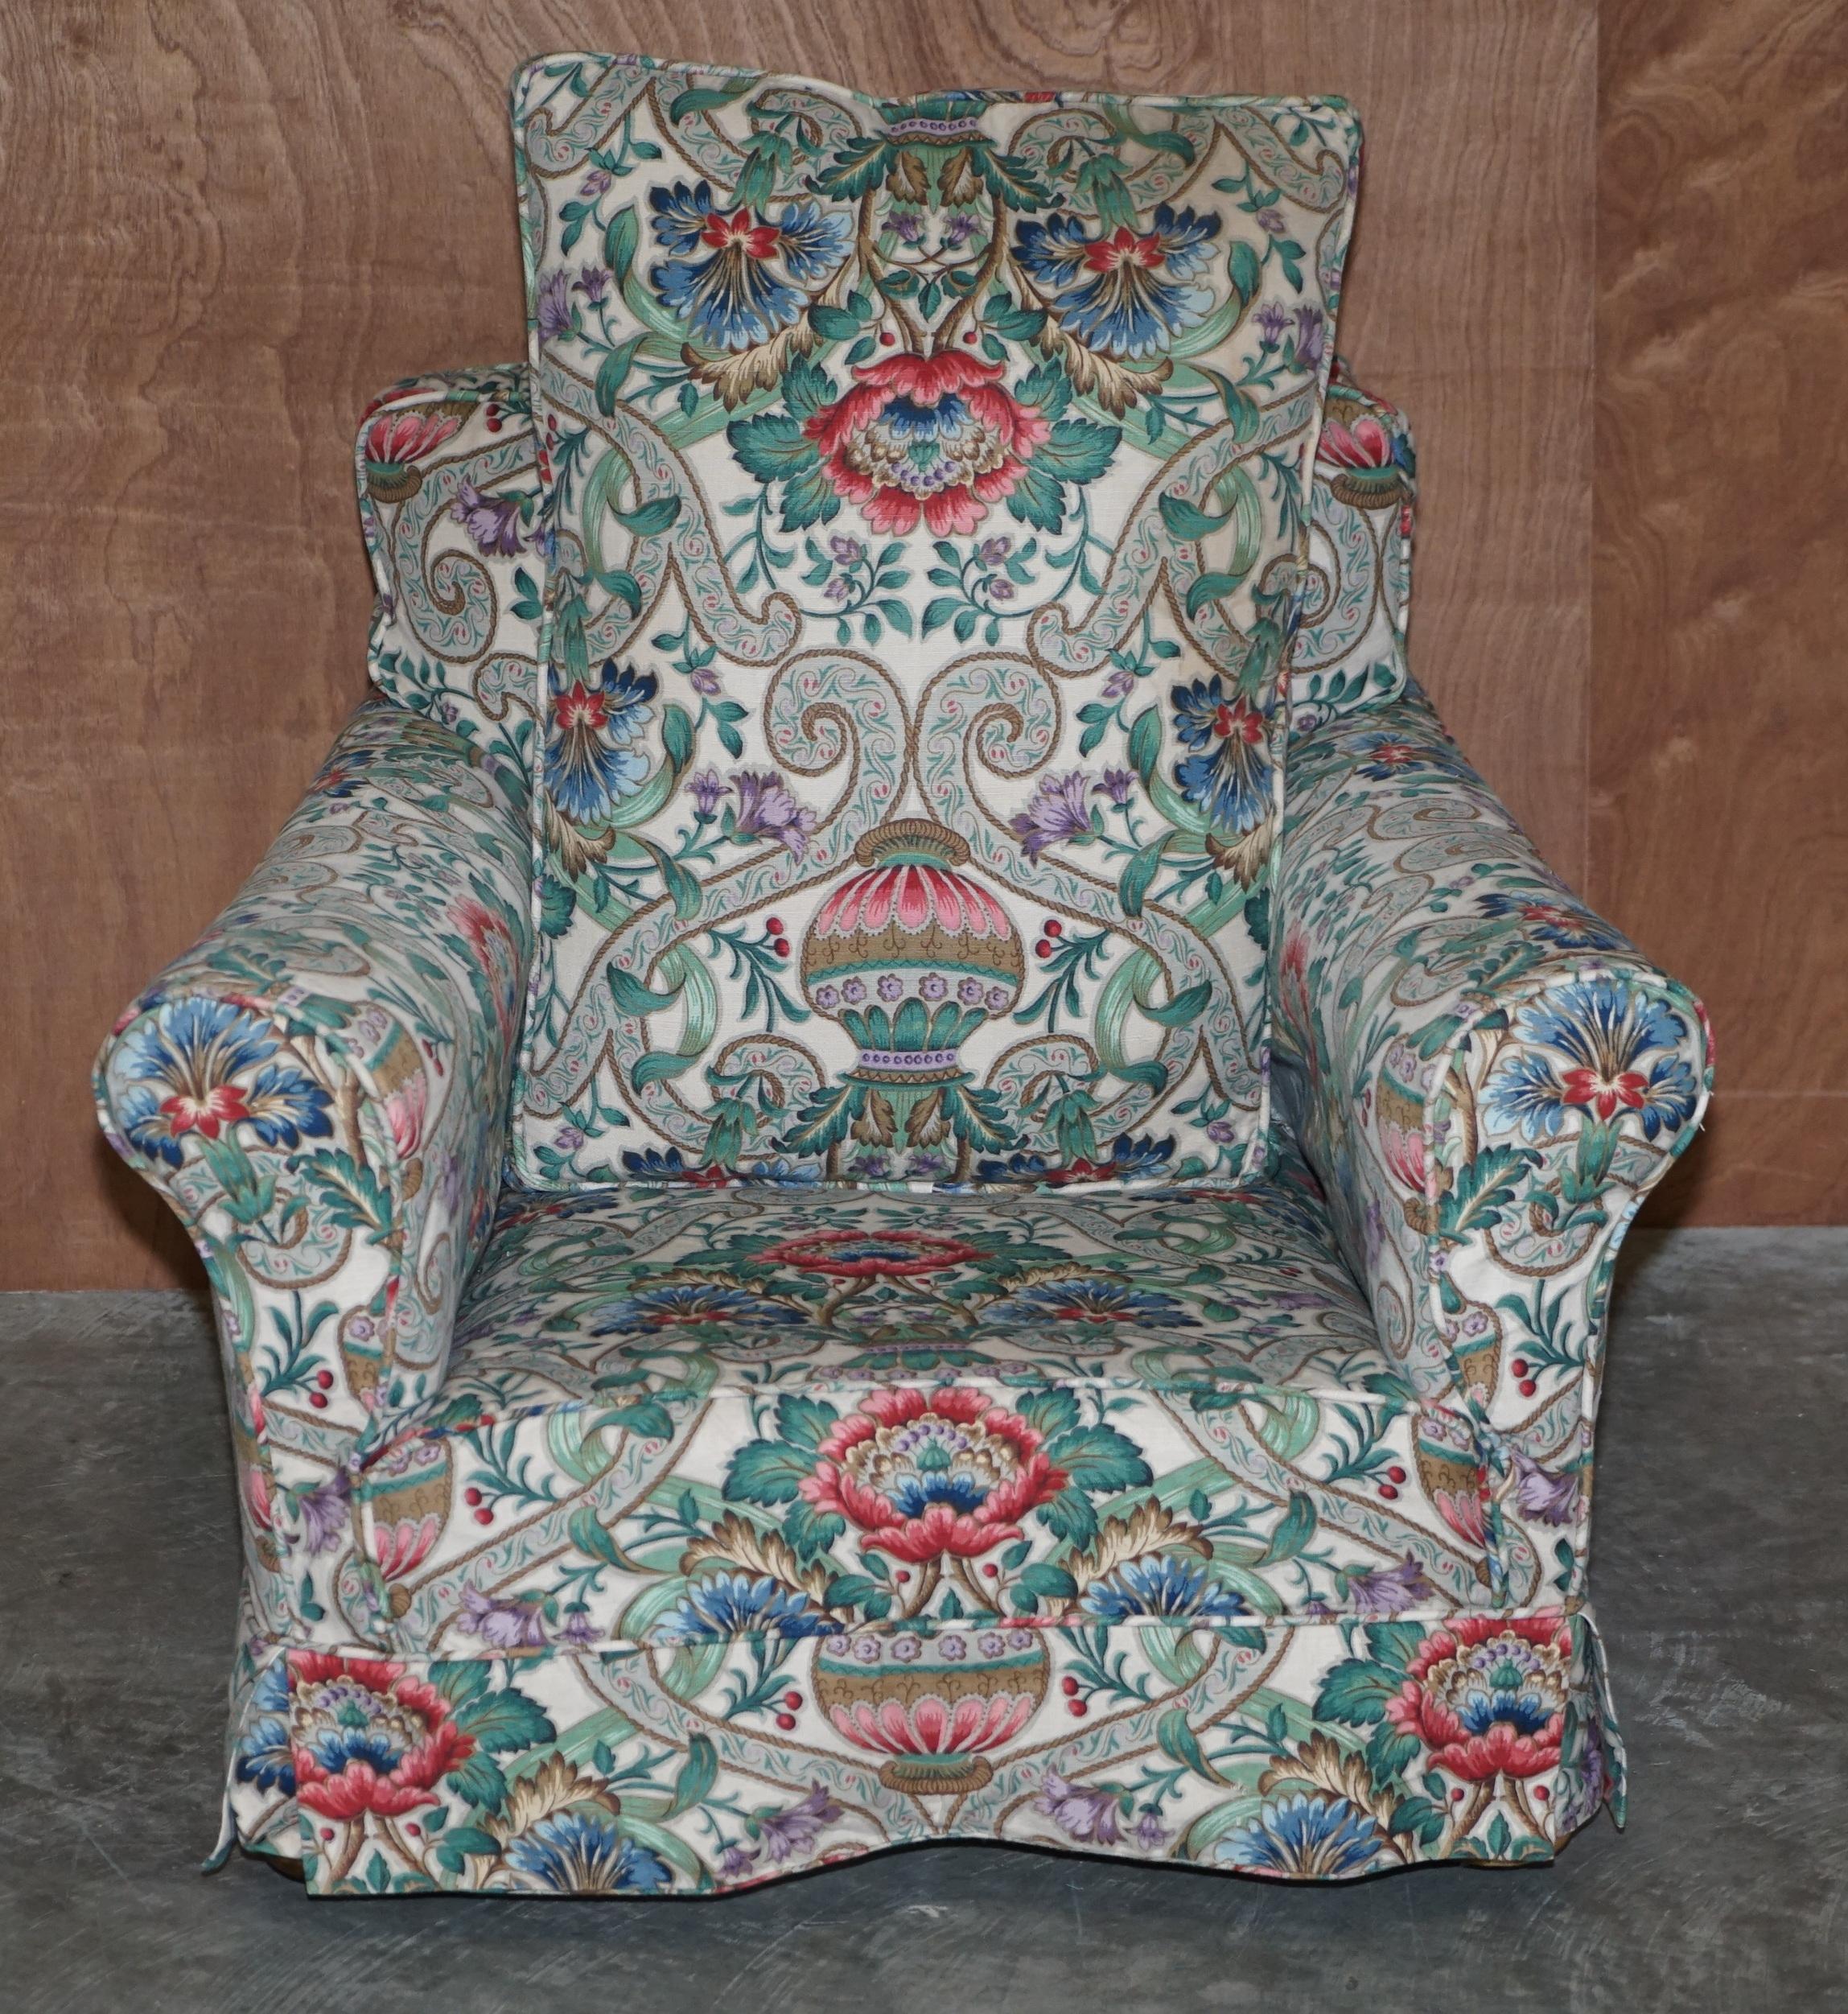 Antique Victorian circa 1900 Club Armchair with Chintz Embroidered Upholstery For Sale 5